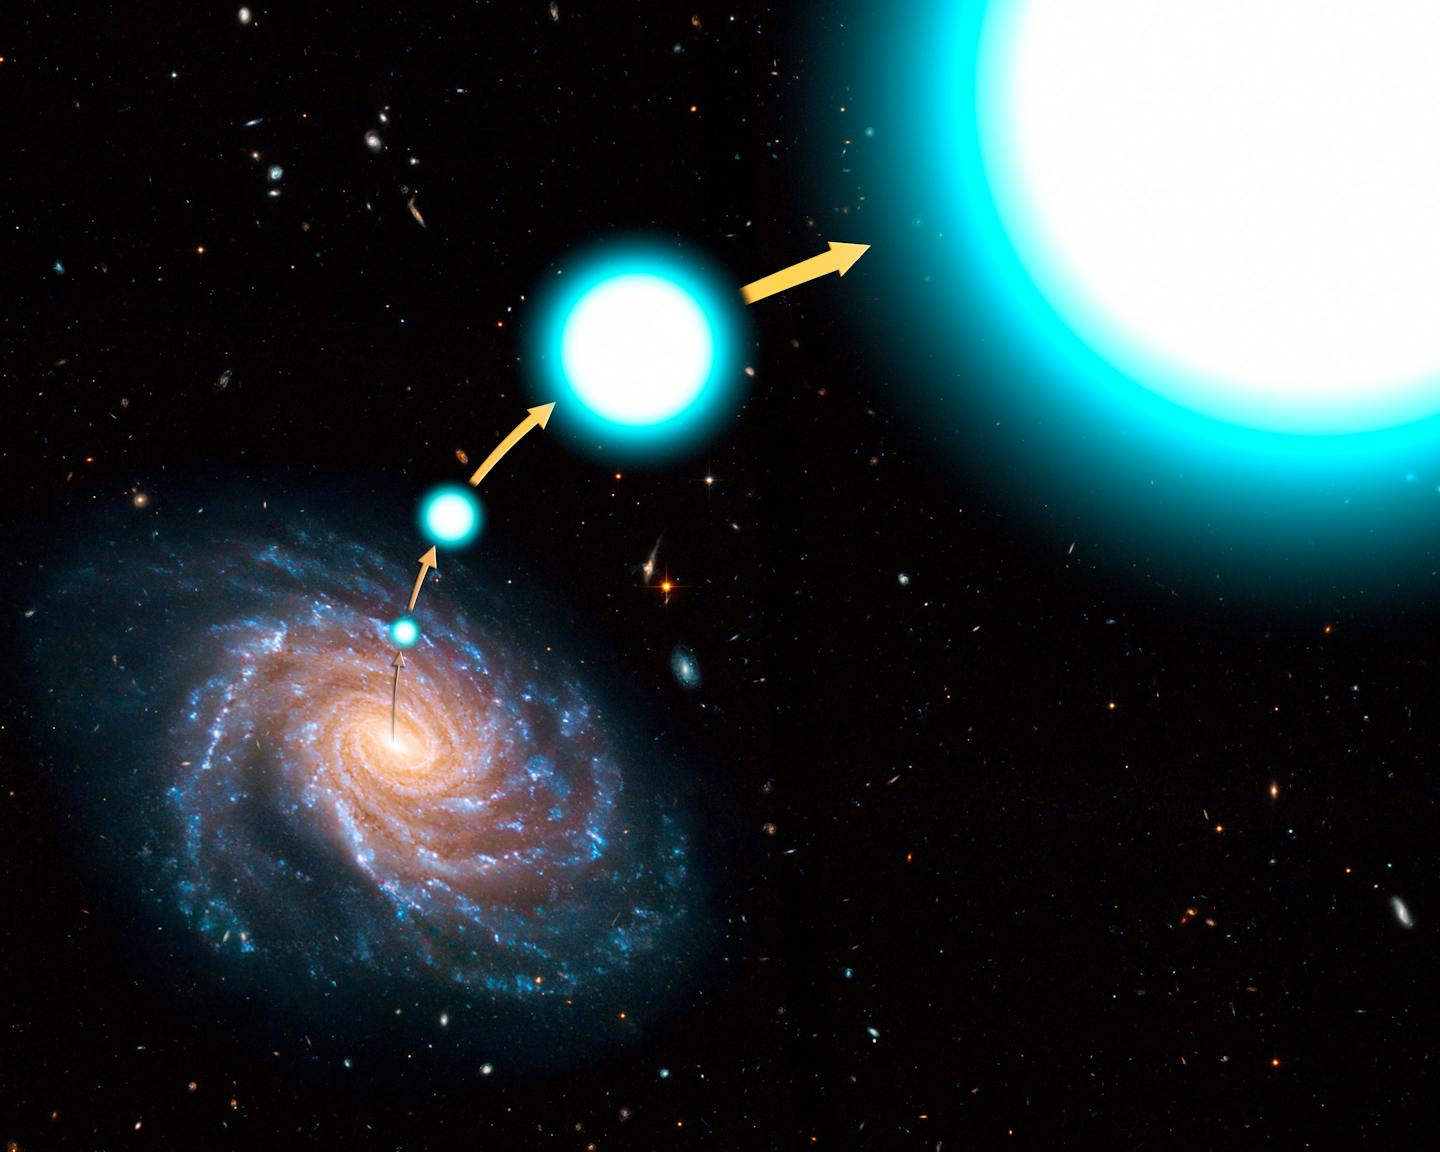 A bluish white star leaving the Milky Way galaxy.